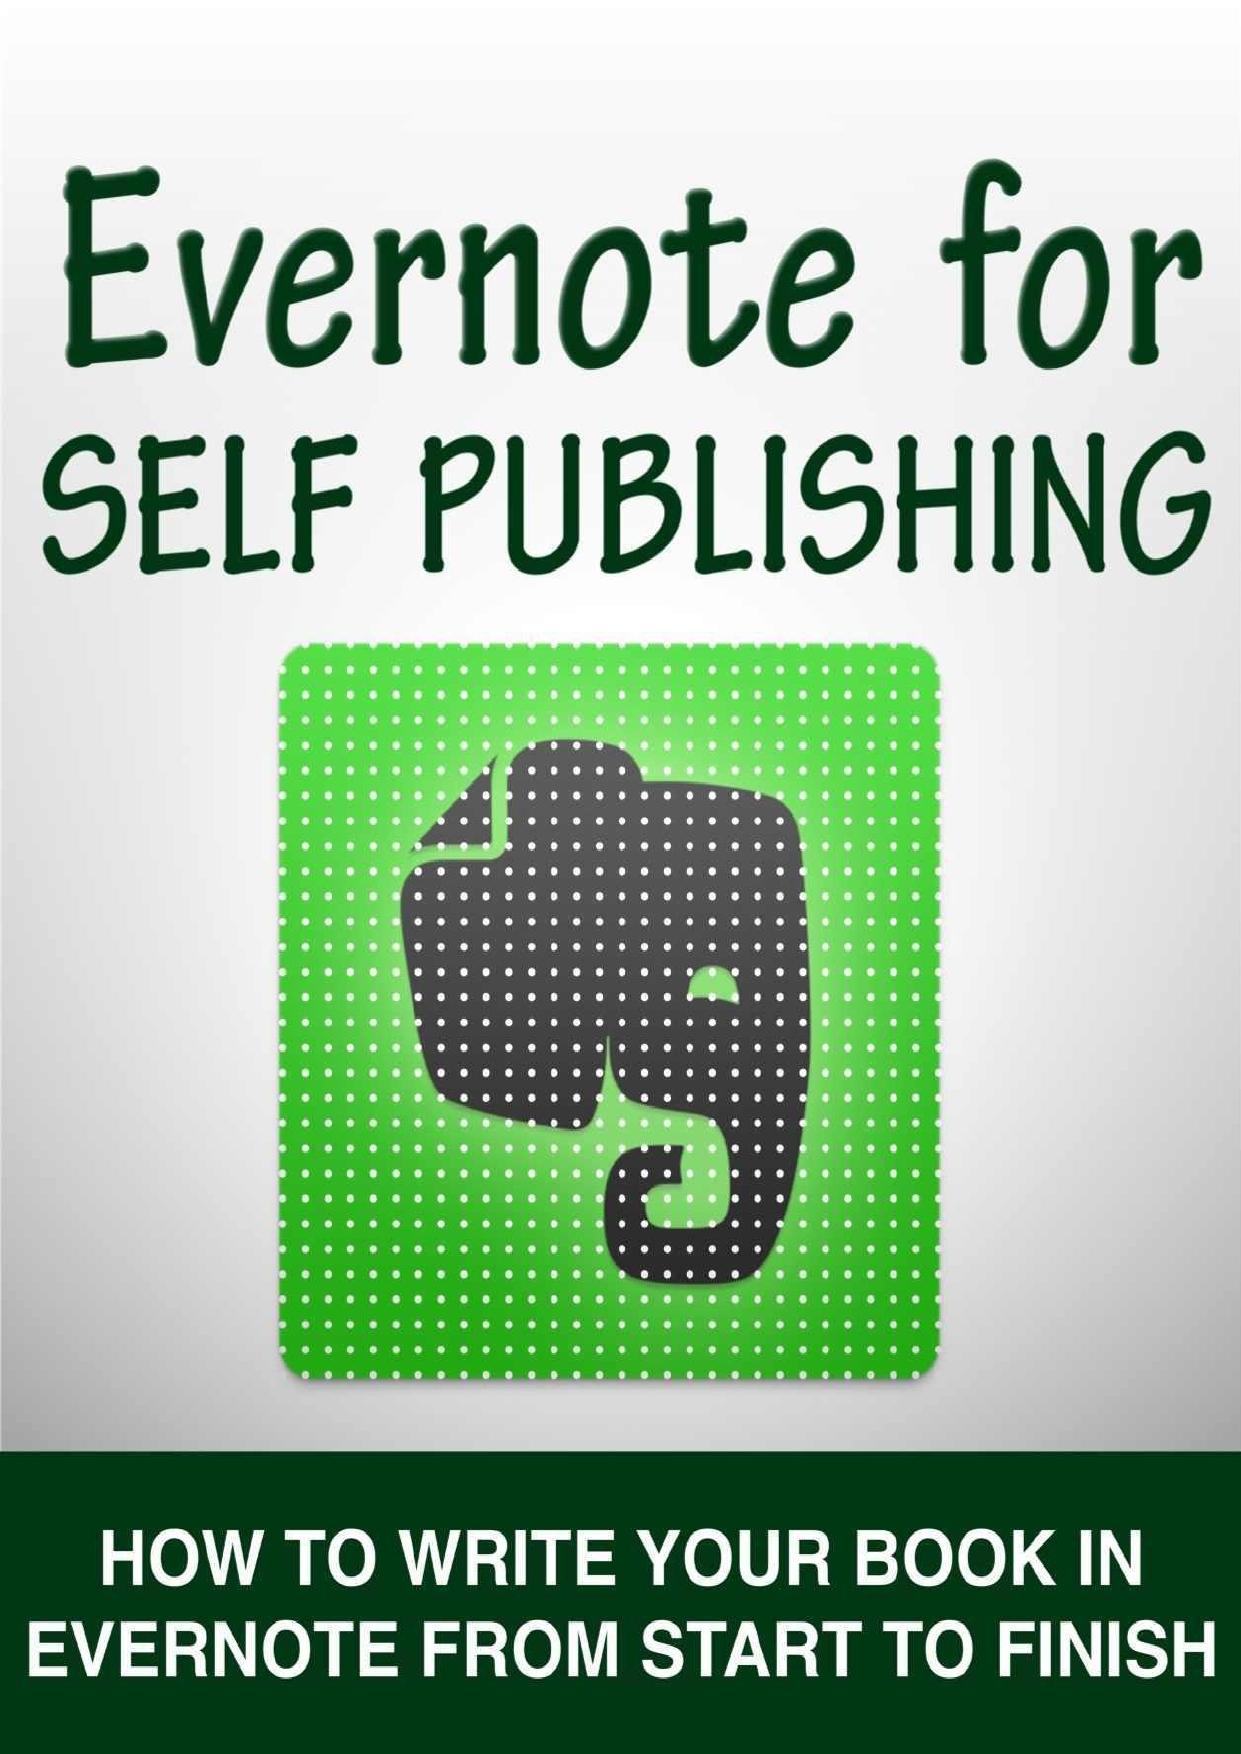 Evernote for Self Publishing: How to Write Your Book in Evernote from Start to Finish by Jose John